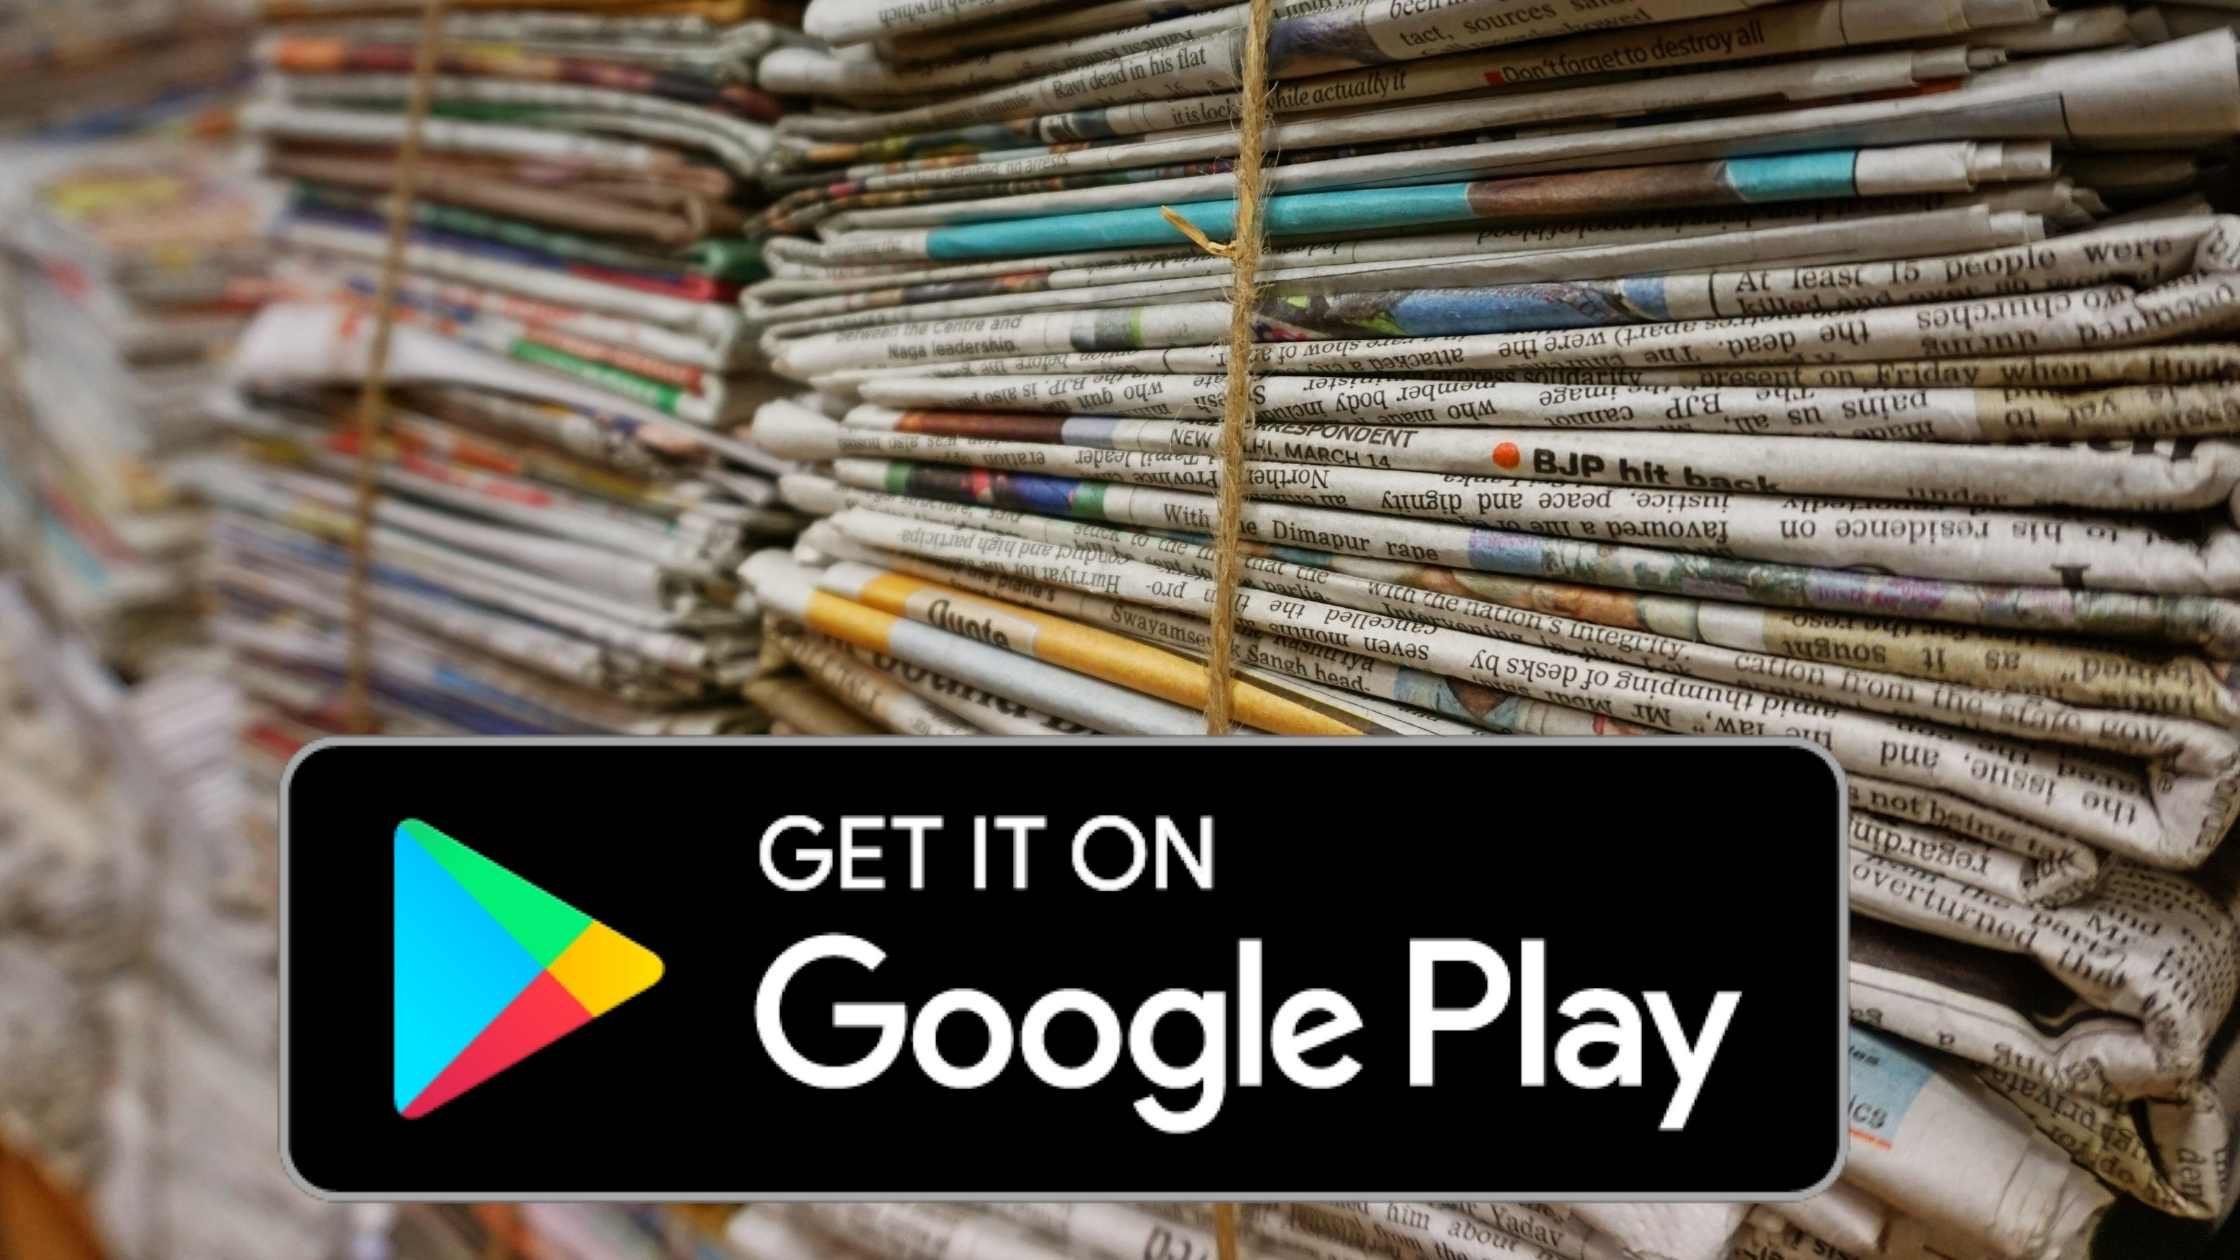 App bundle concept; photo of stacks of bundled newspapers and Get it on Google Play button icon